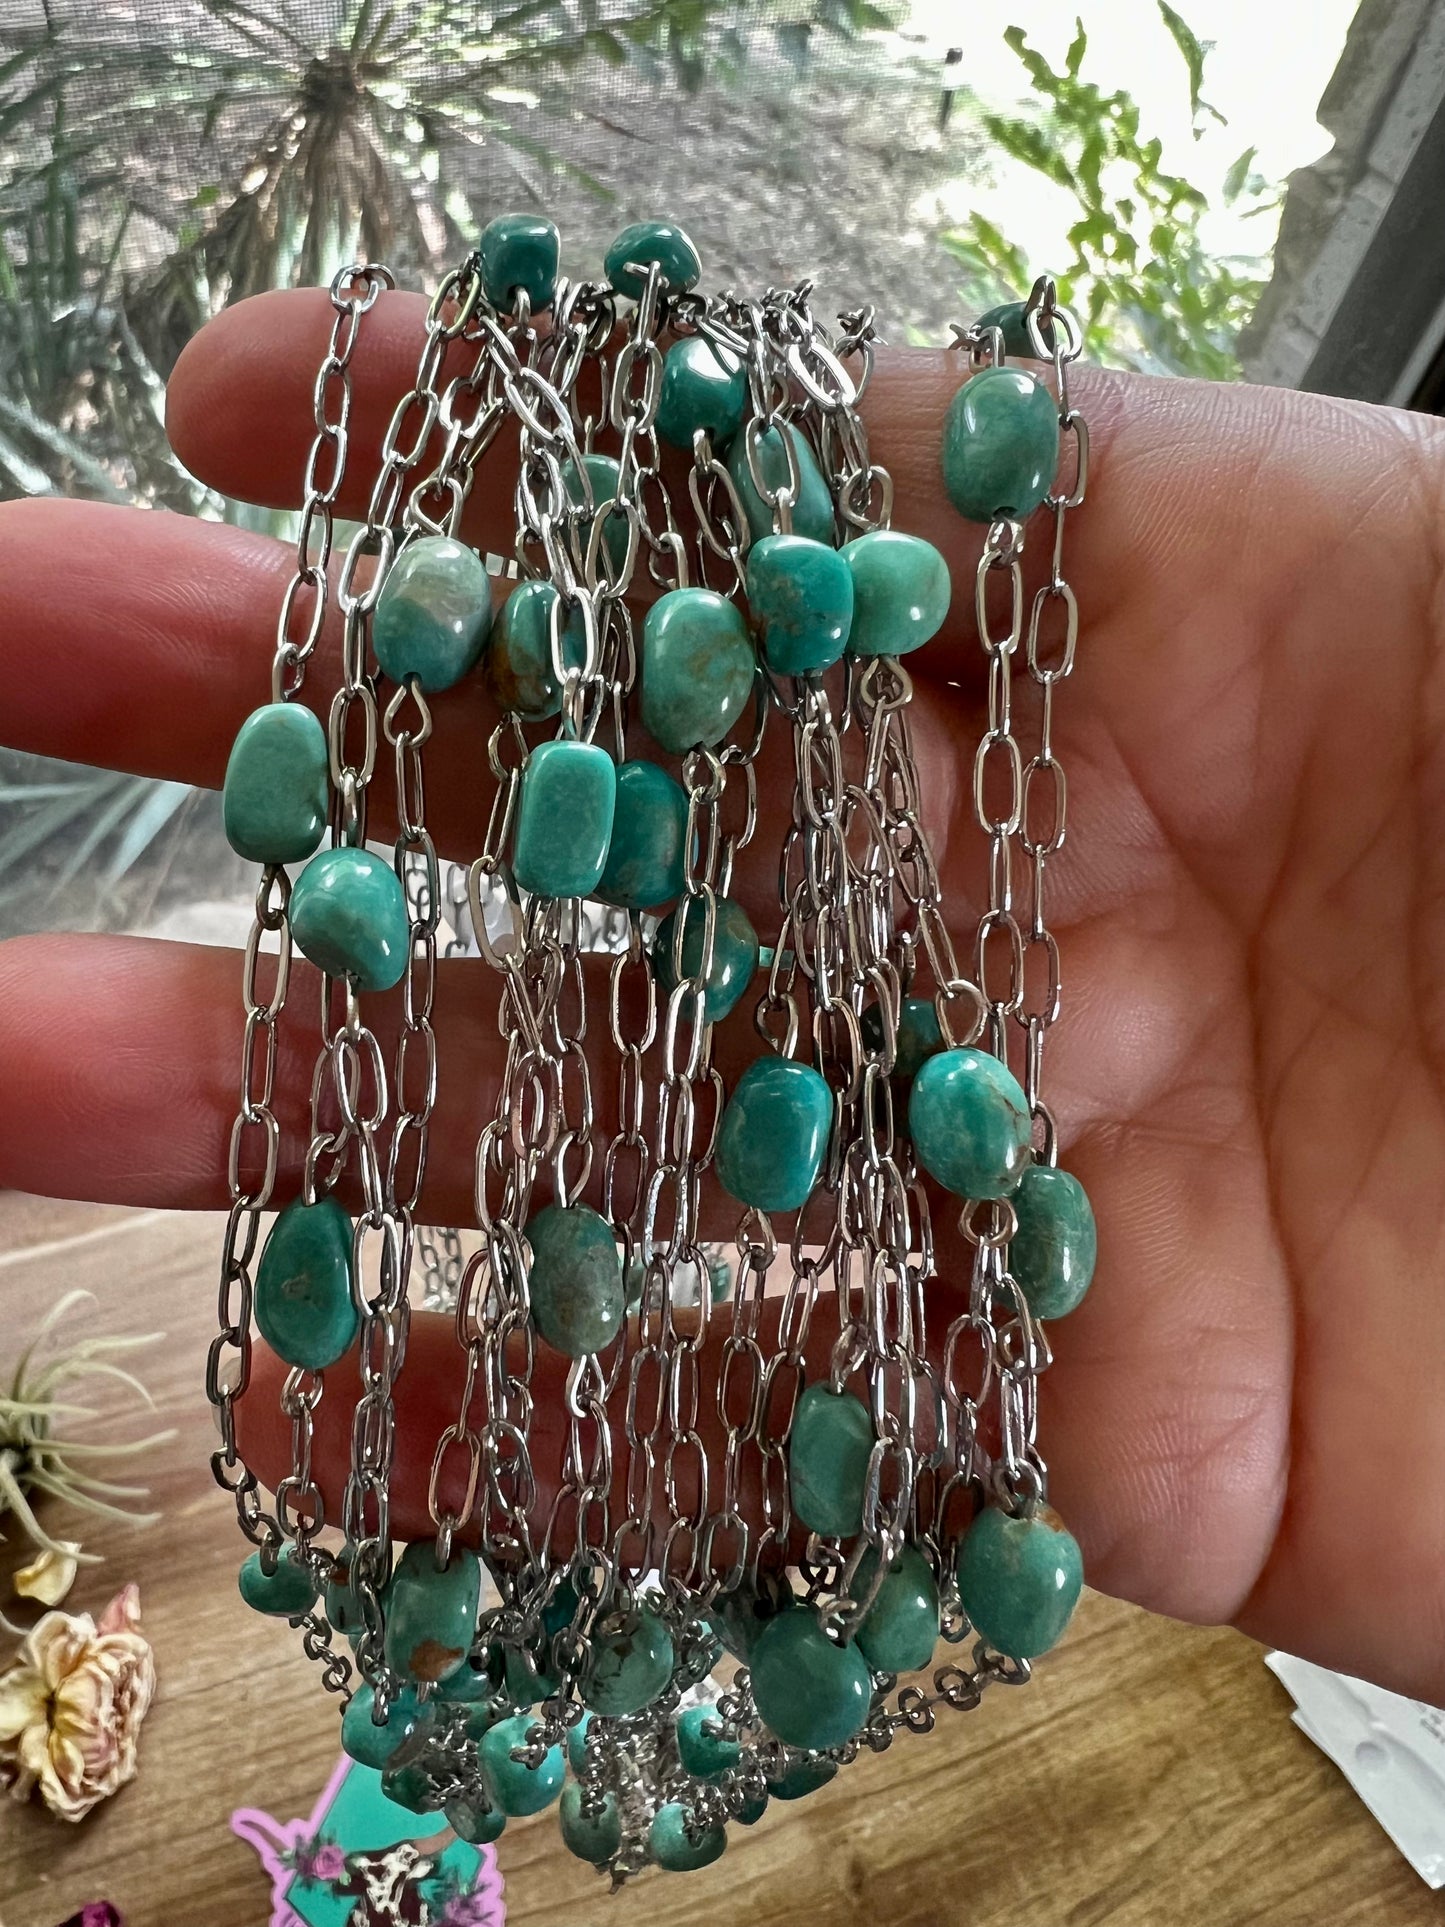 14 inch long chain with real turquoise nuggets